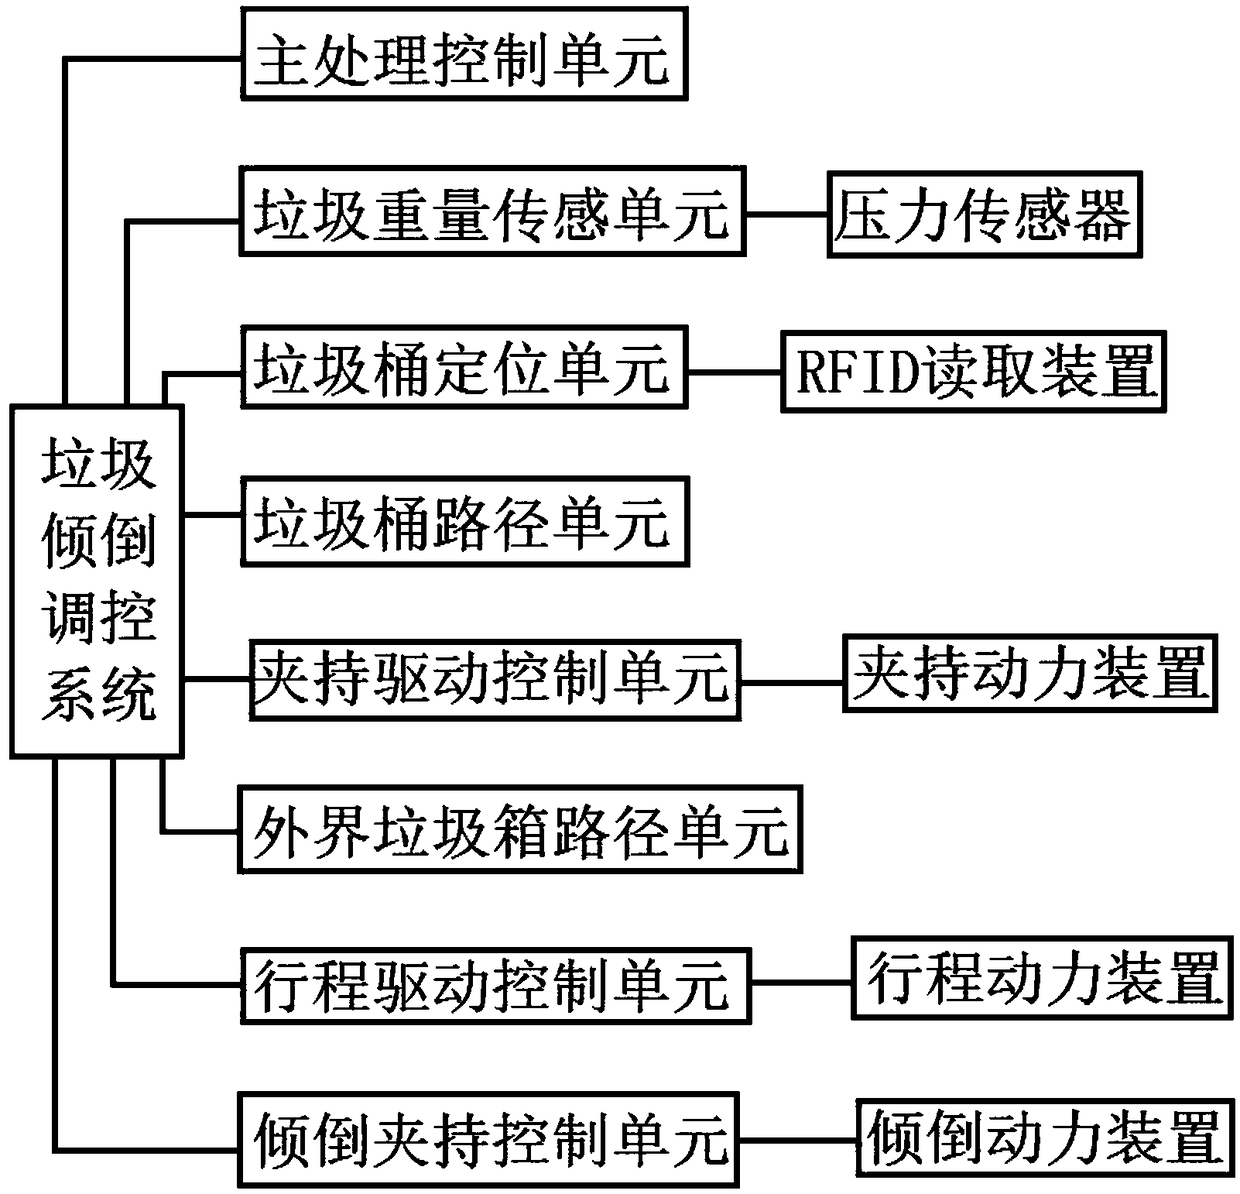 Garbage dumping robot regulation and control system based on path setting plan